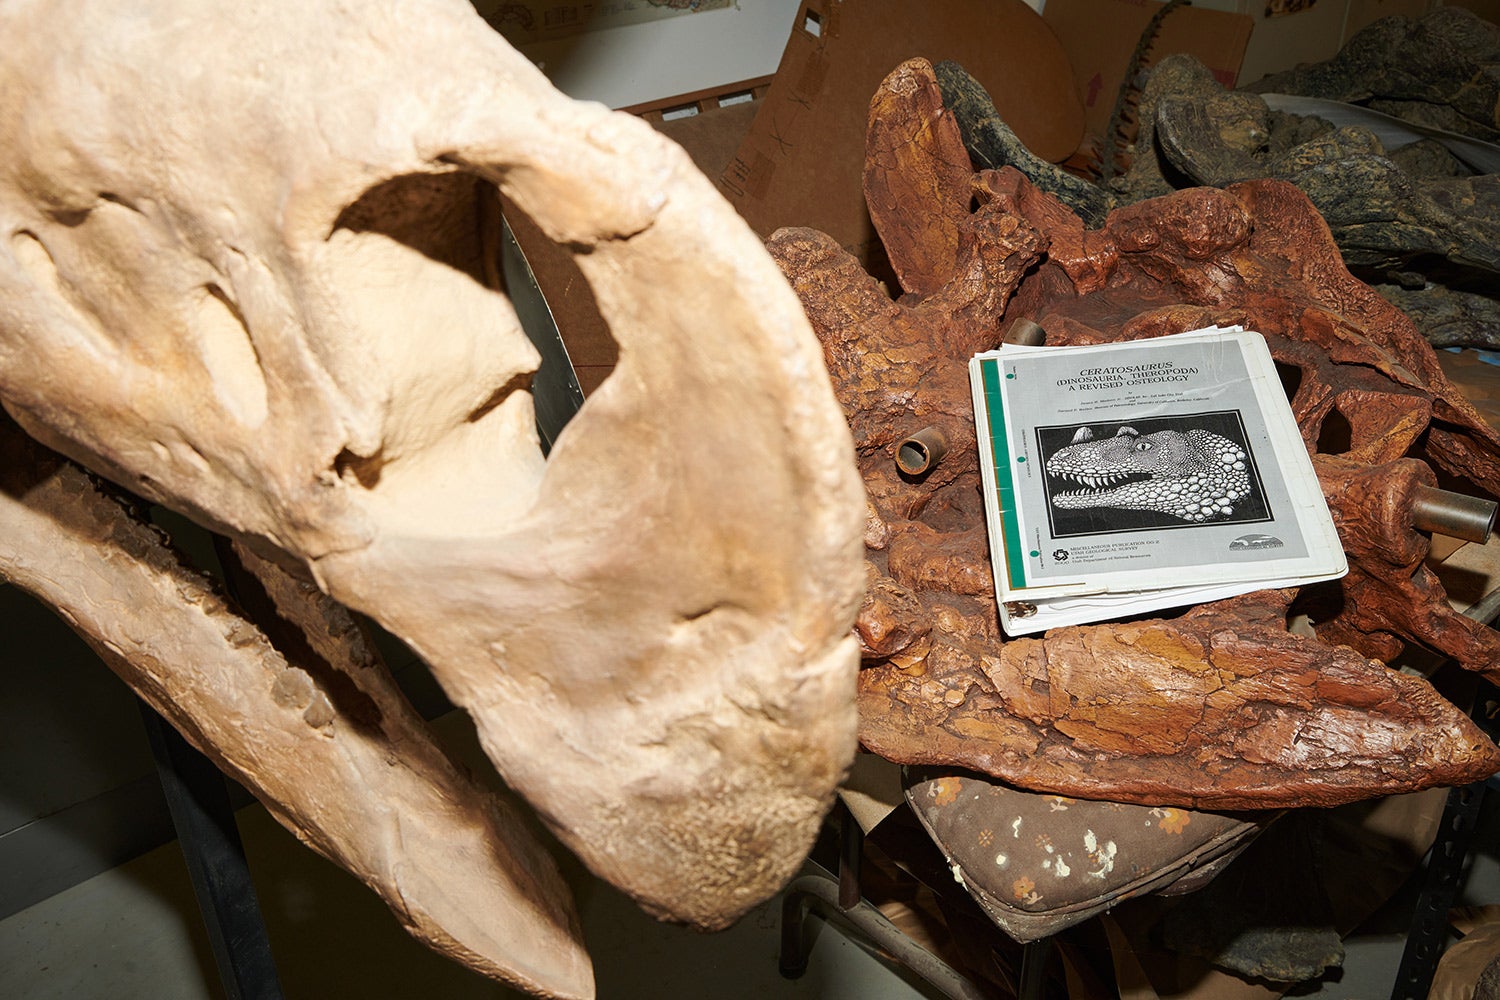 binder with bone anatomy information sits is placed on fossil parts next to large fossil head